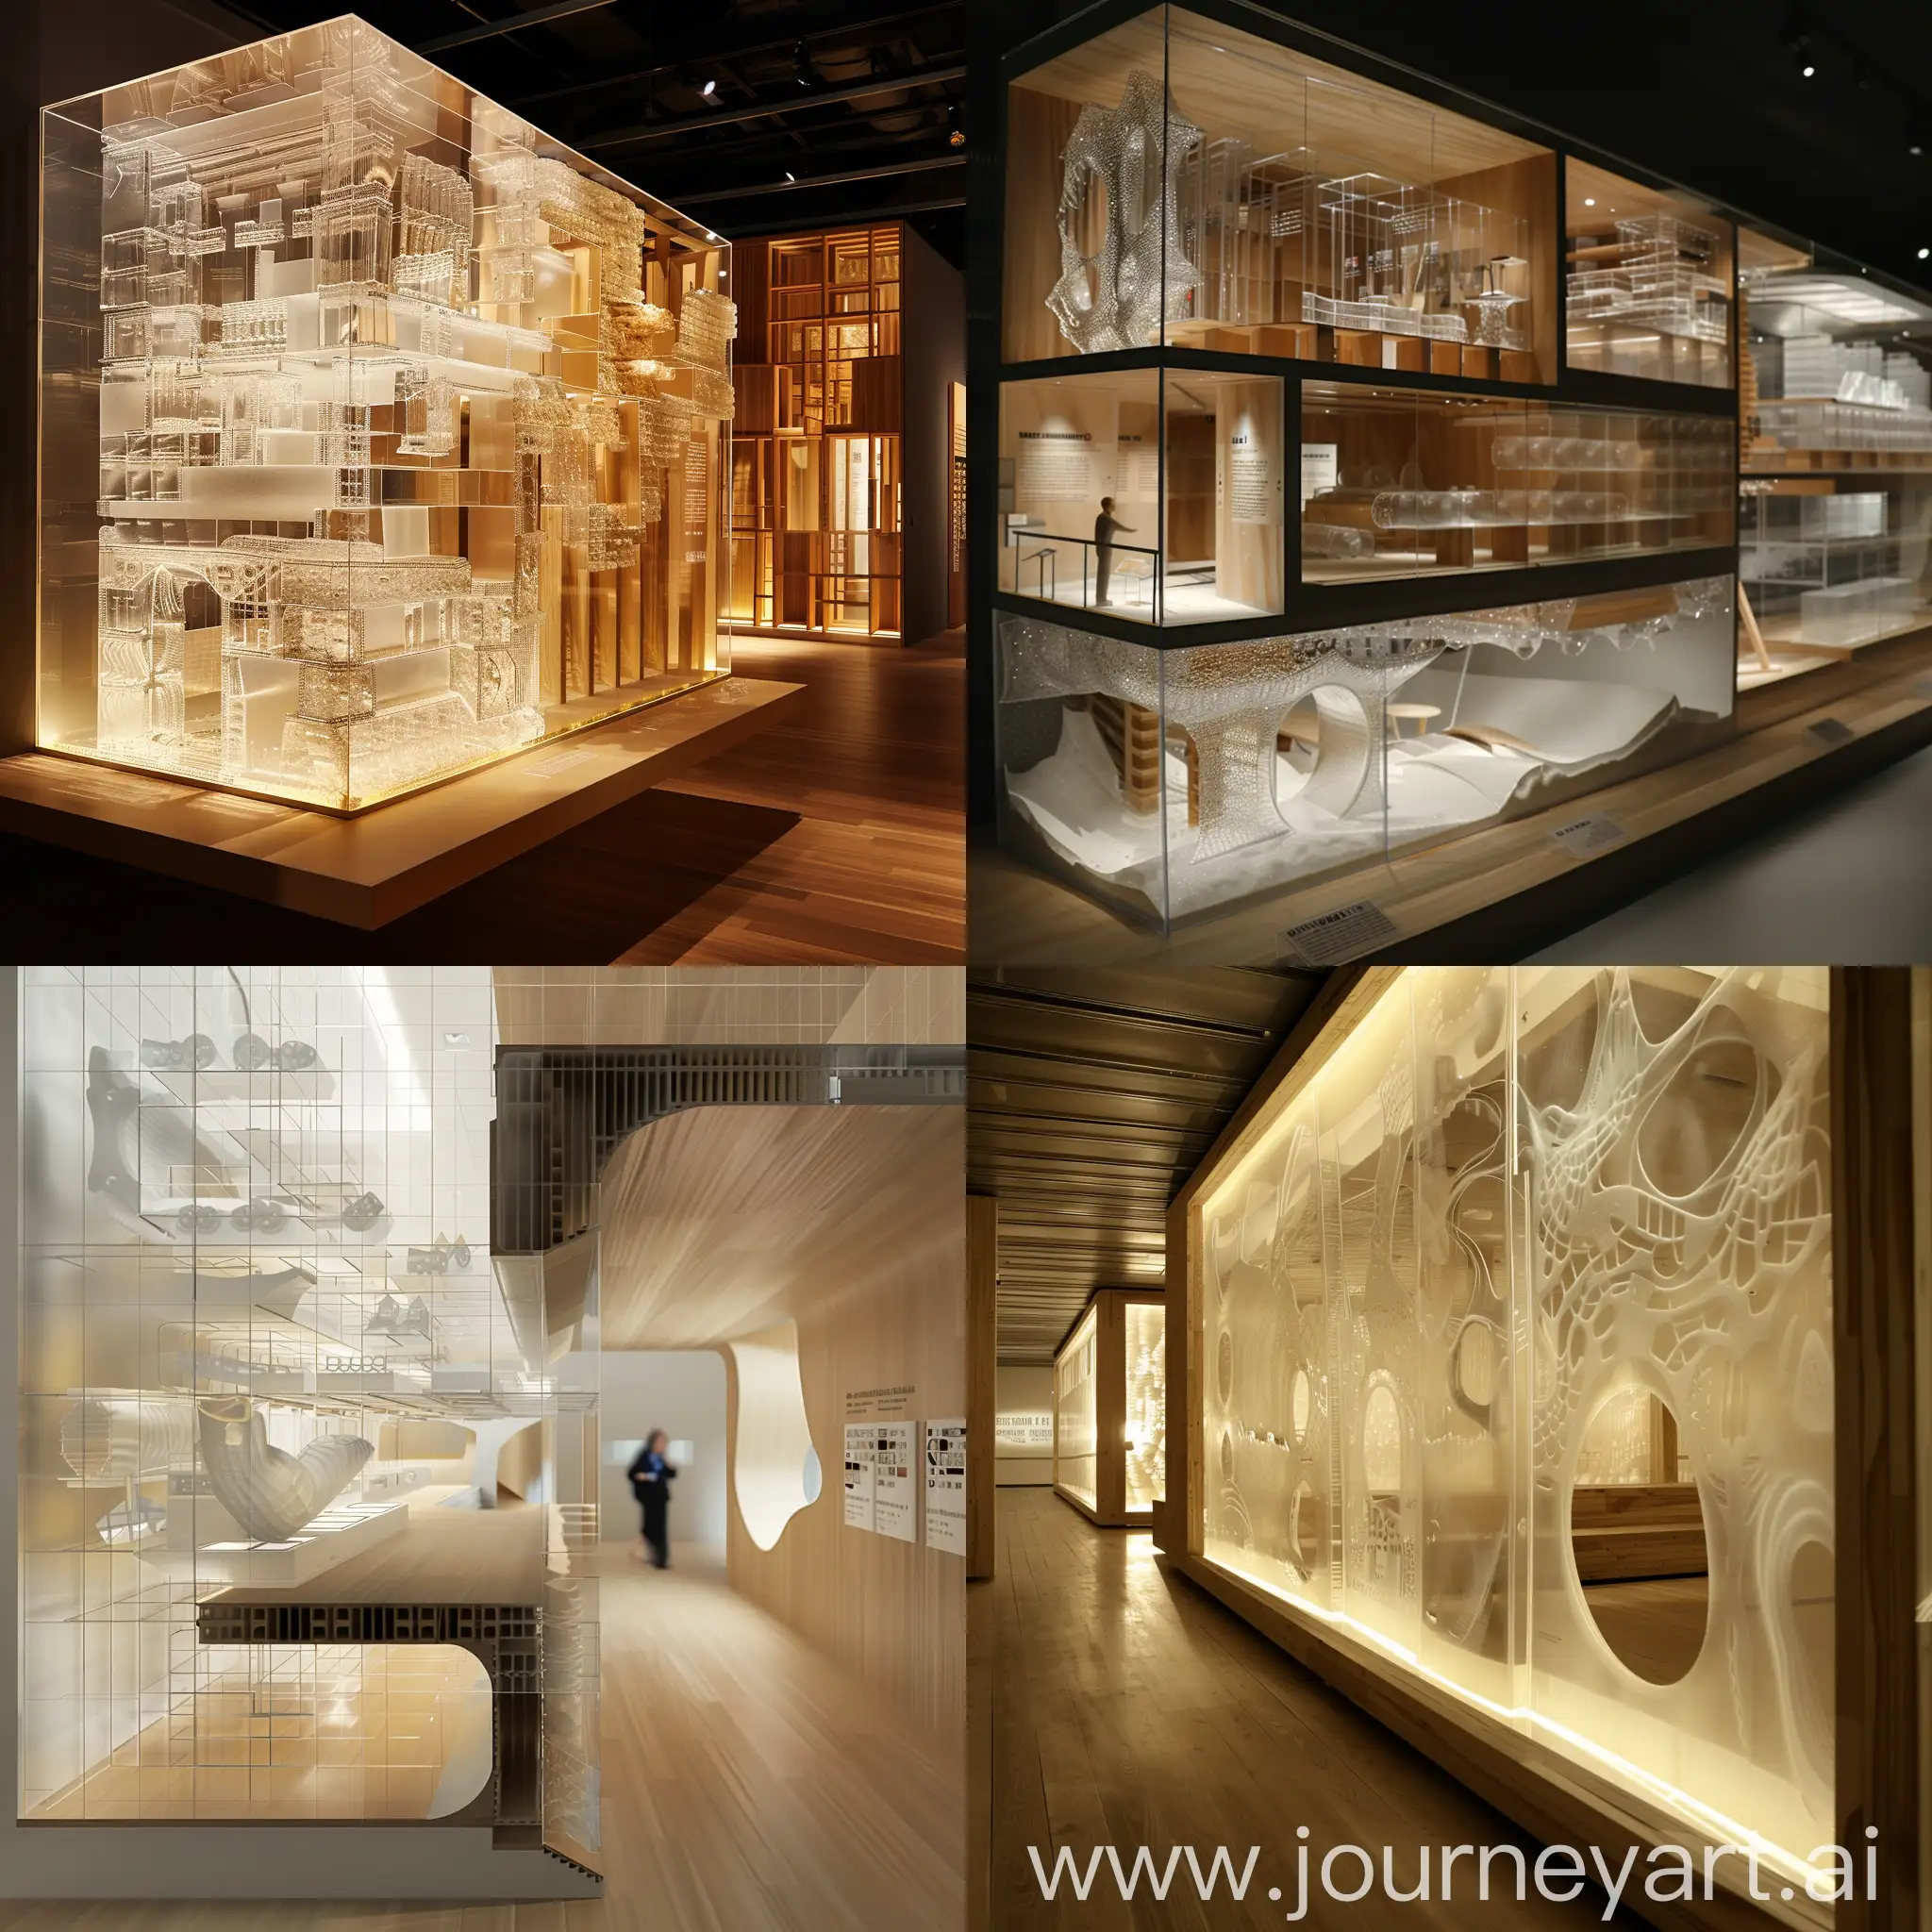 imagine a section of a  museum that shows that the external is made out of plastic byblock and the interior out of wood